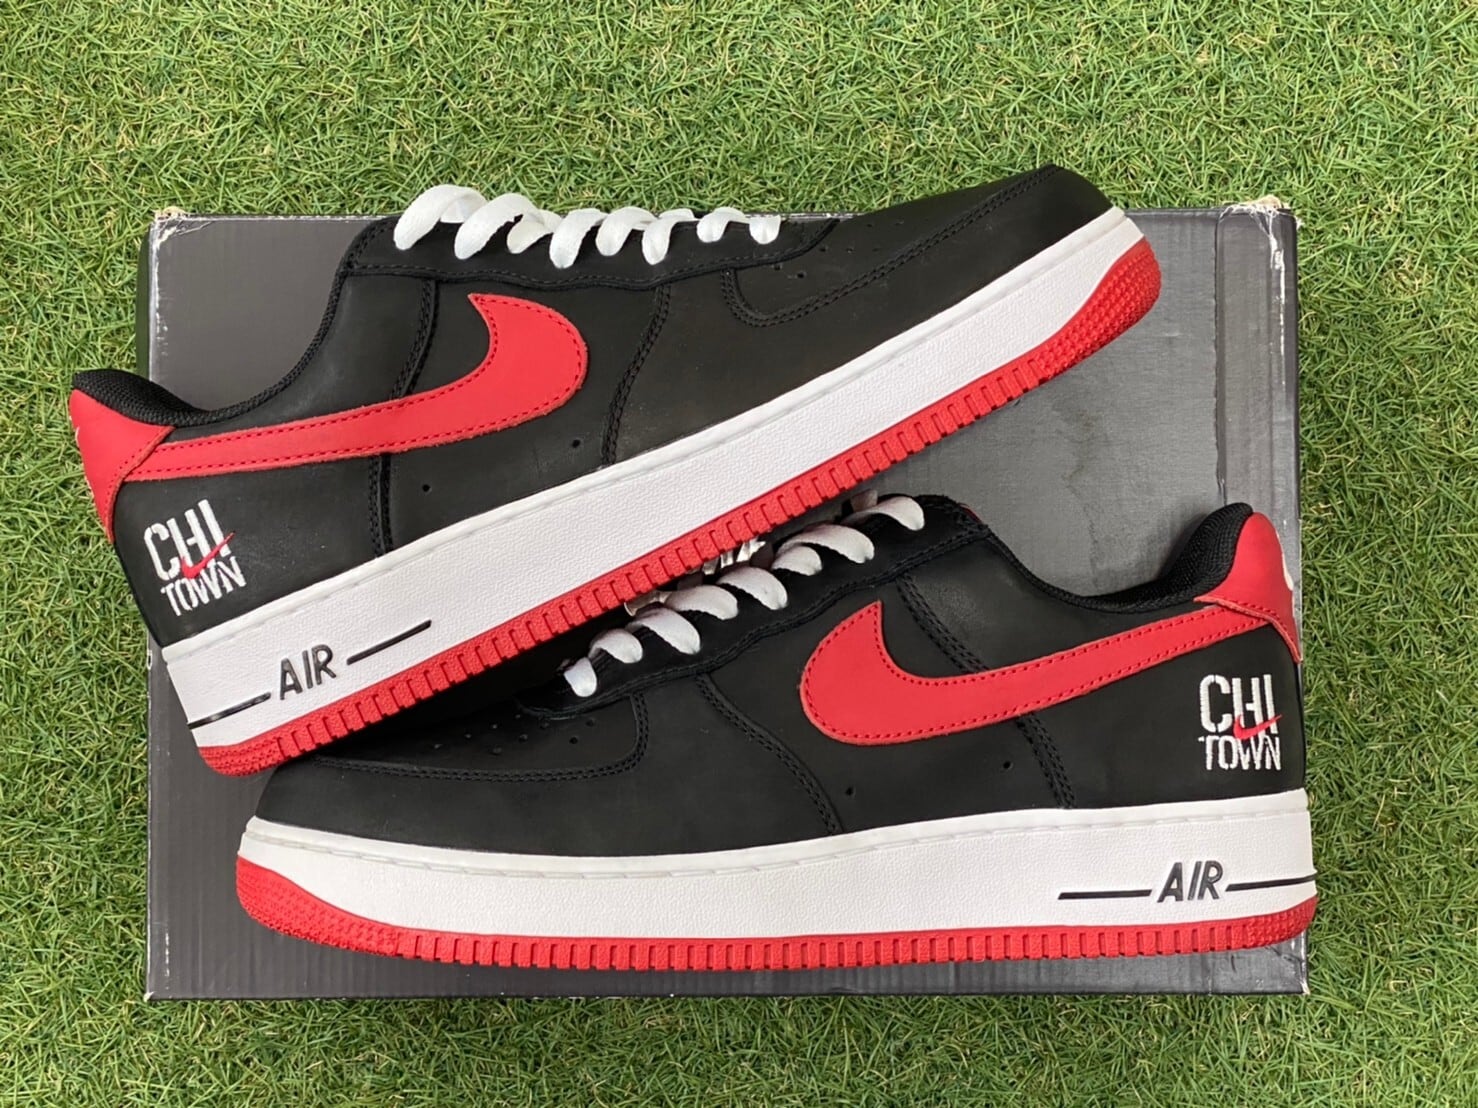 NIKE AIR FORCE 1 LOW CHICAGO 28cm 845053-001 160KD4729 | BRAND BUYERS OSAKA